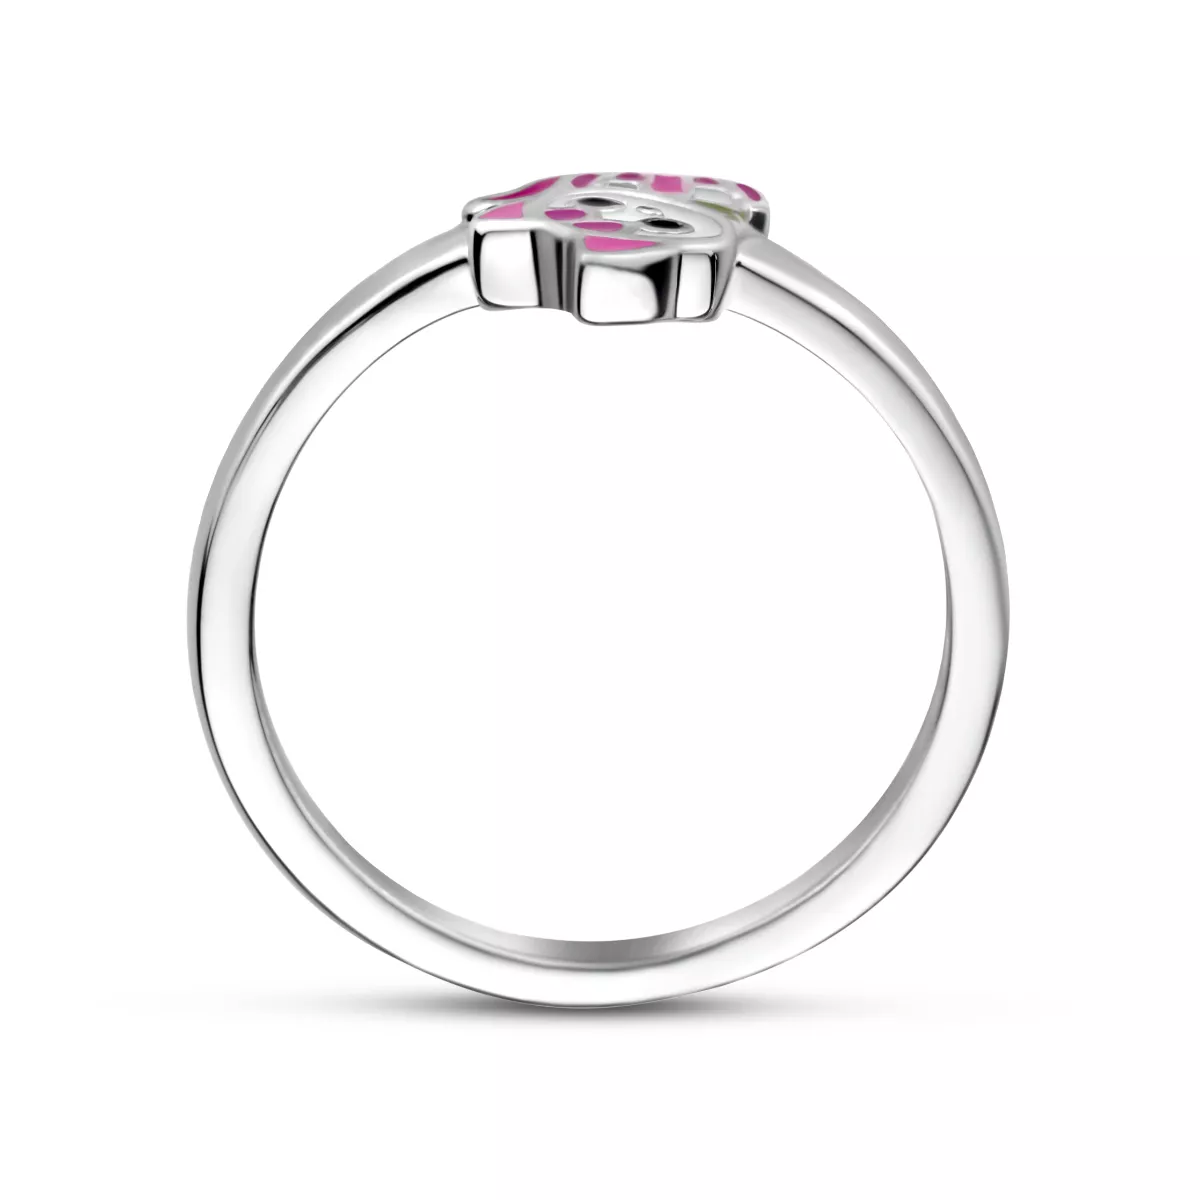 Ring Poes zilver-emaille wit-roze-groen 